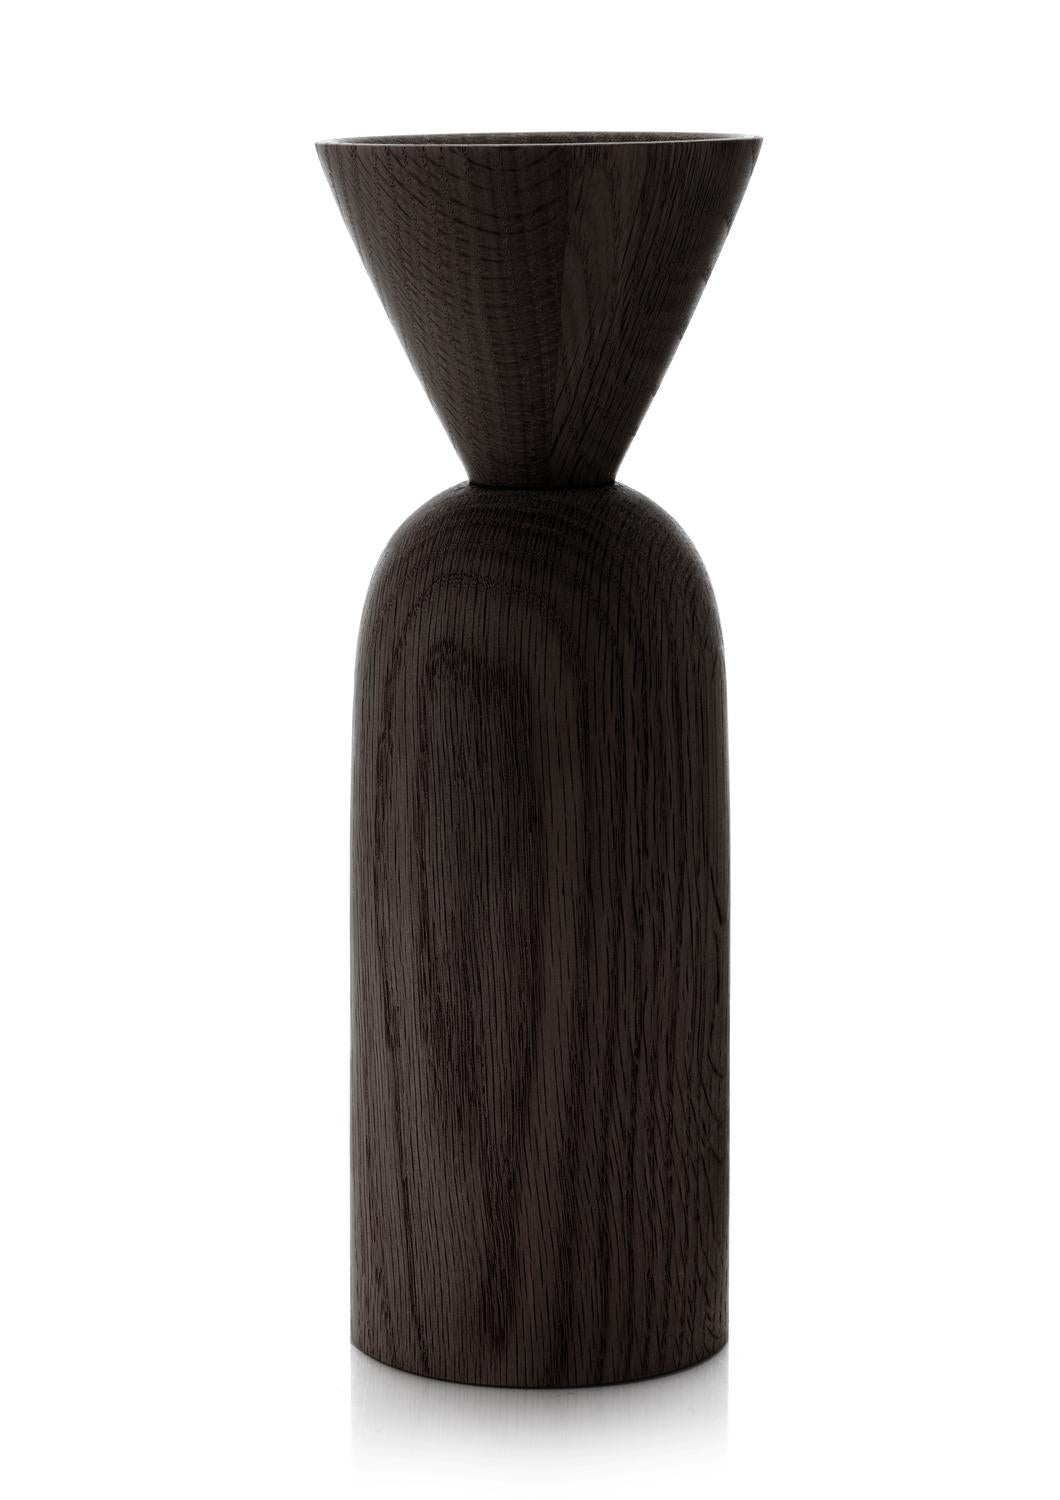 Contemporary Cone Shape Black Stained Oak Vase by Applicata For Sale